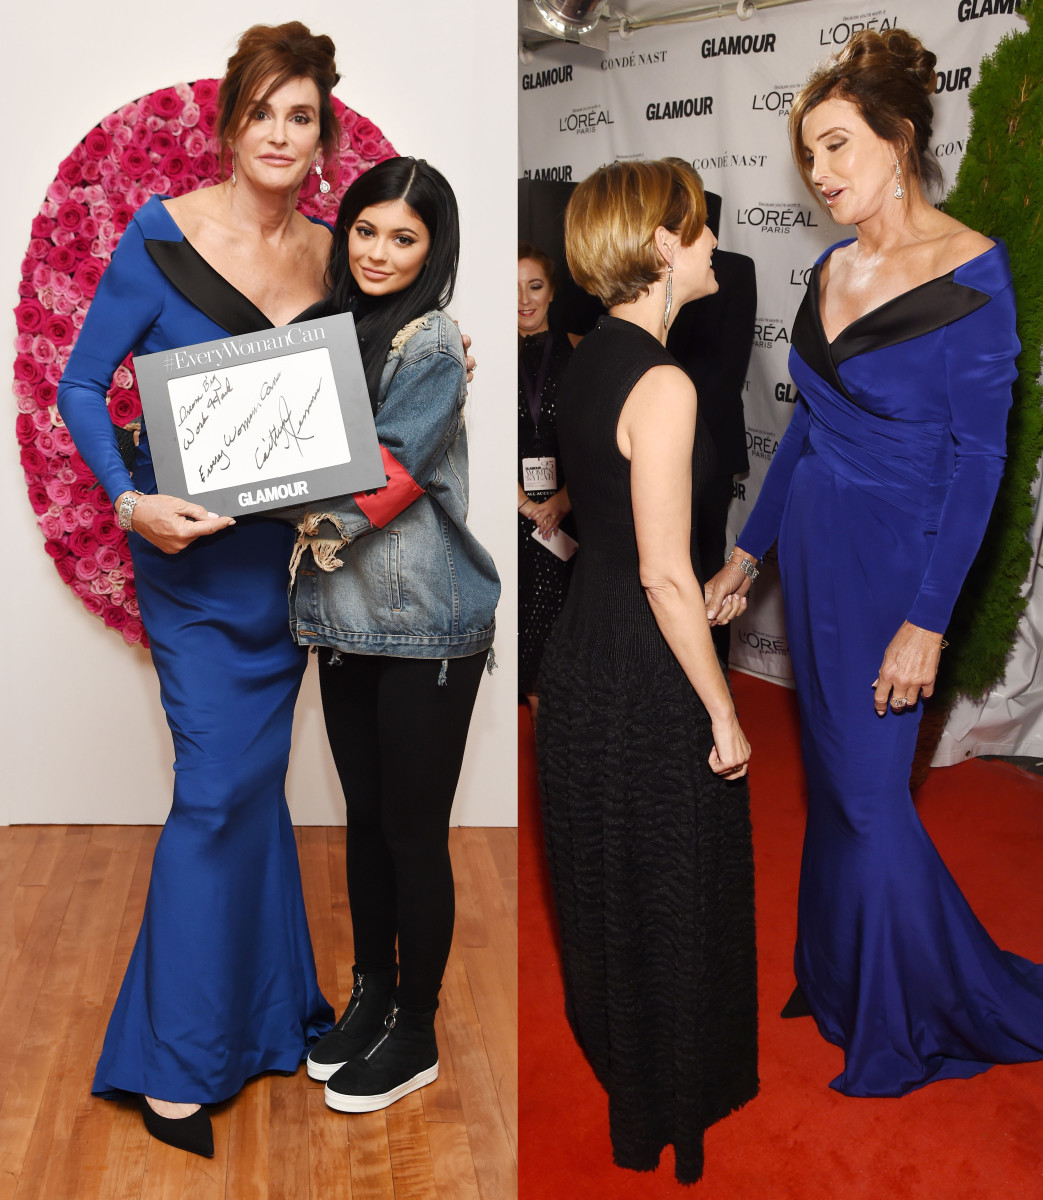 Caitlyn with Kylie Jenner, left, and Cindi Leive with Caitlyn Jenner, right. Photos: Nicholas Hunt/Getty Images and Larry Busacca/Getty Images